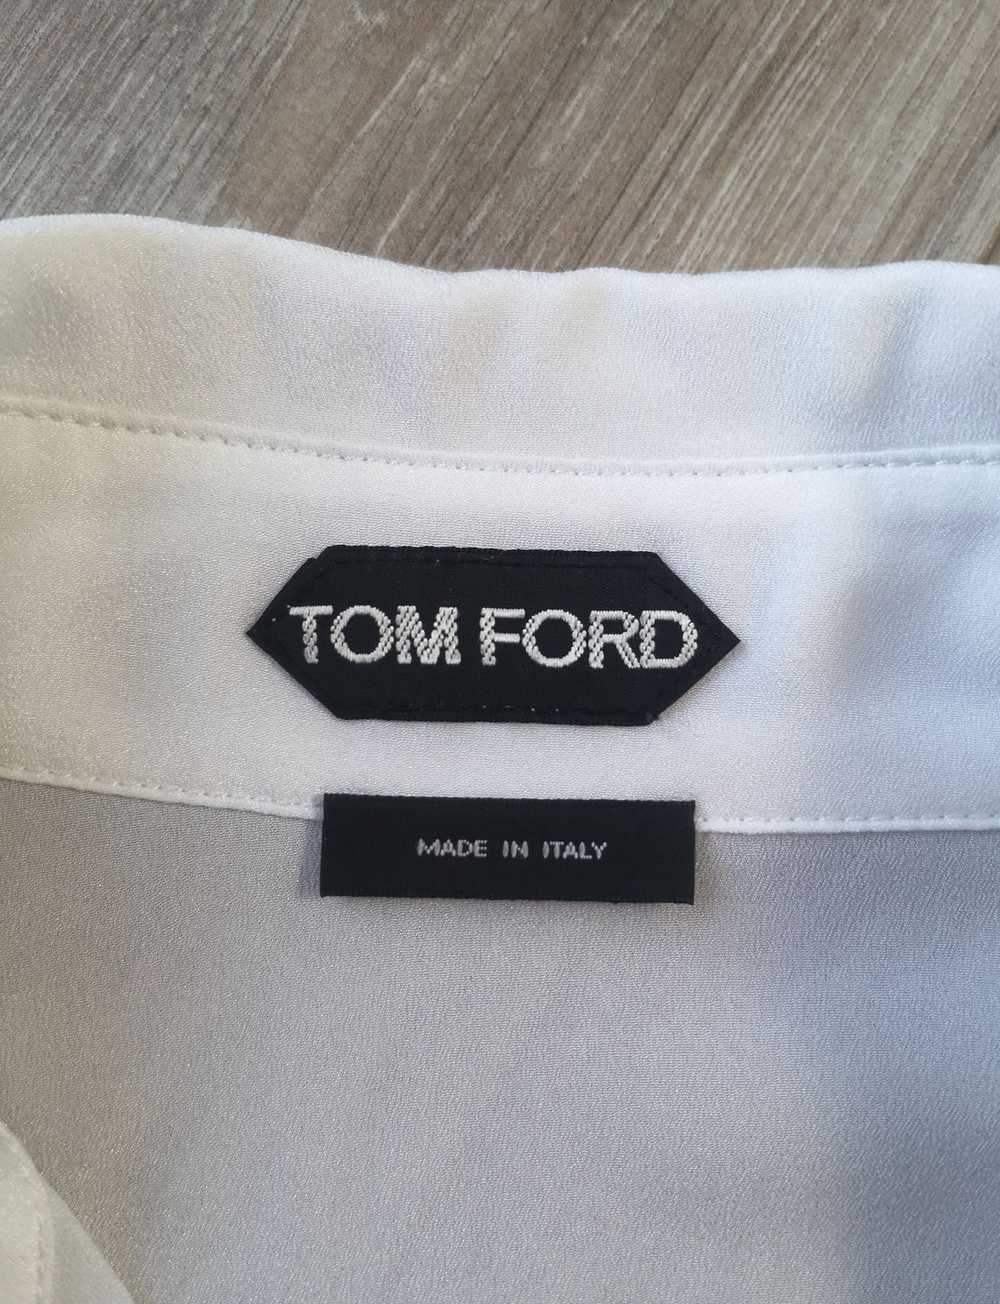 Gucci × Tom Ford TOM FORD Shirt Button Up Silk Po… - image 10